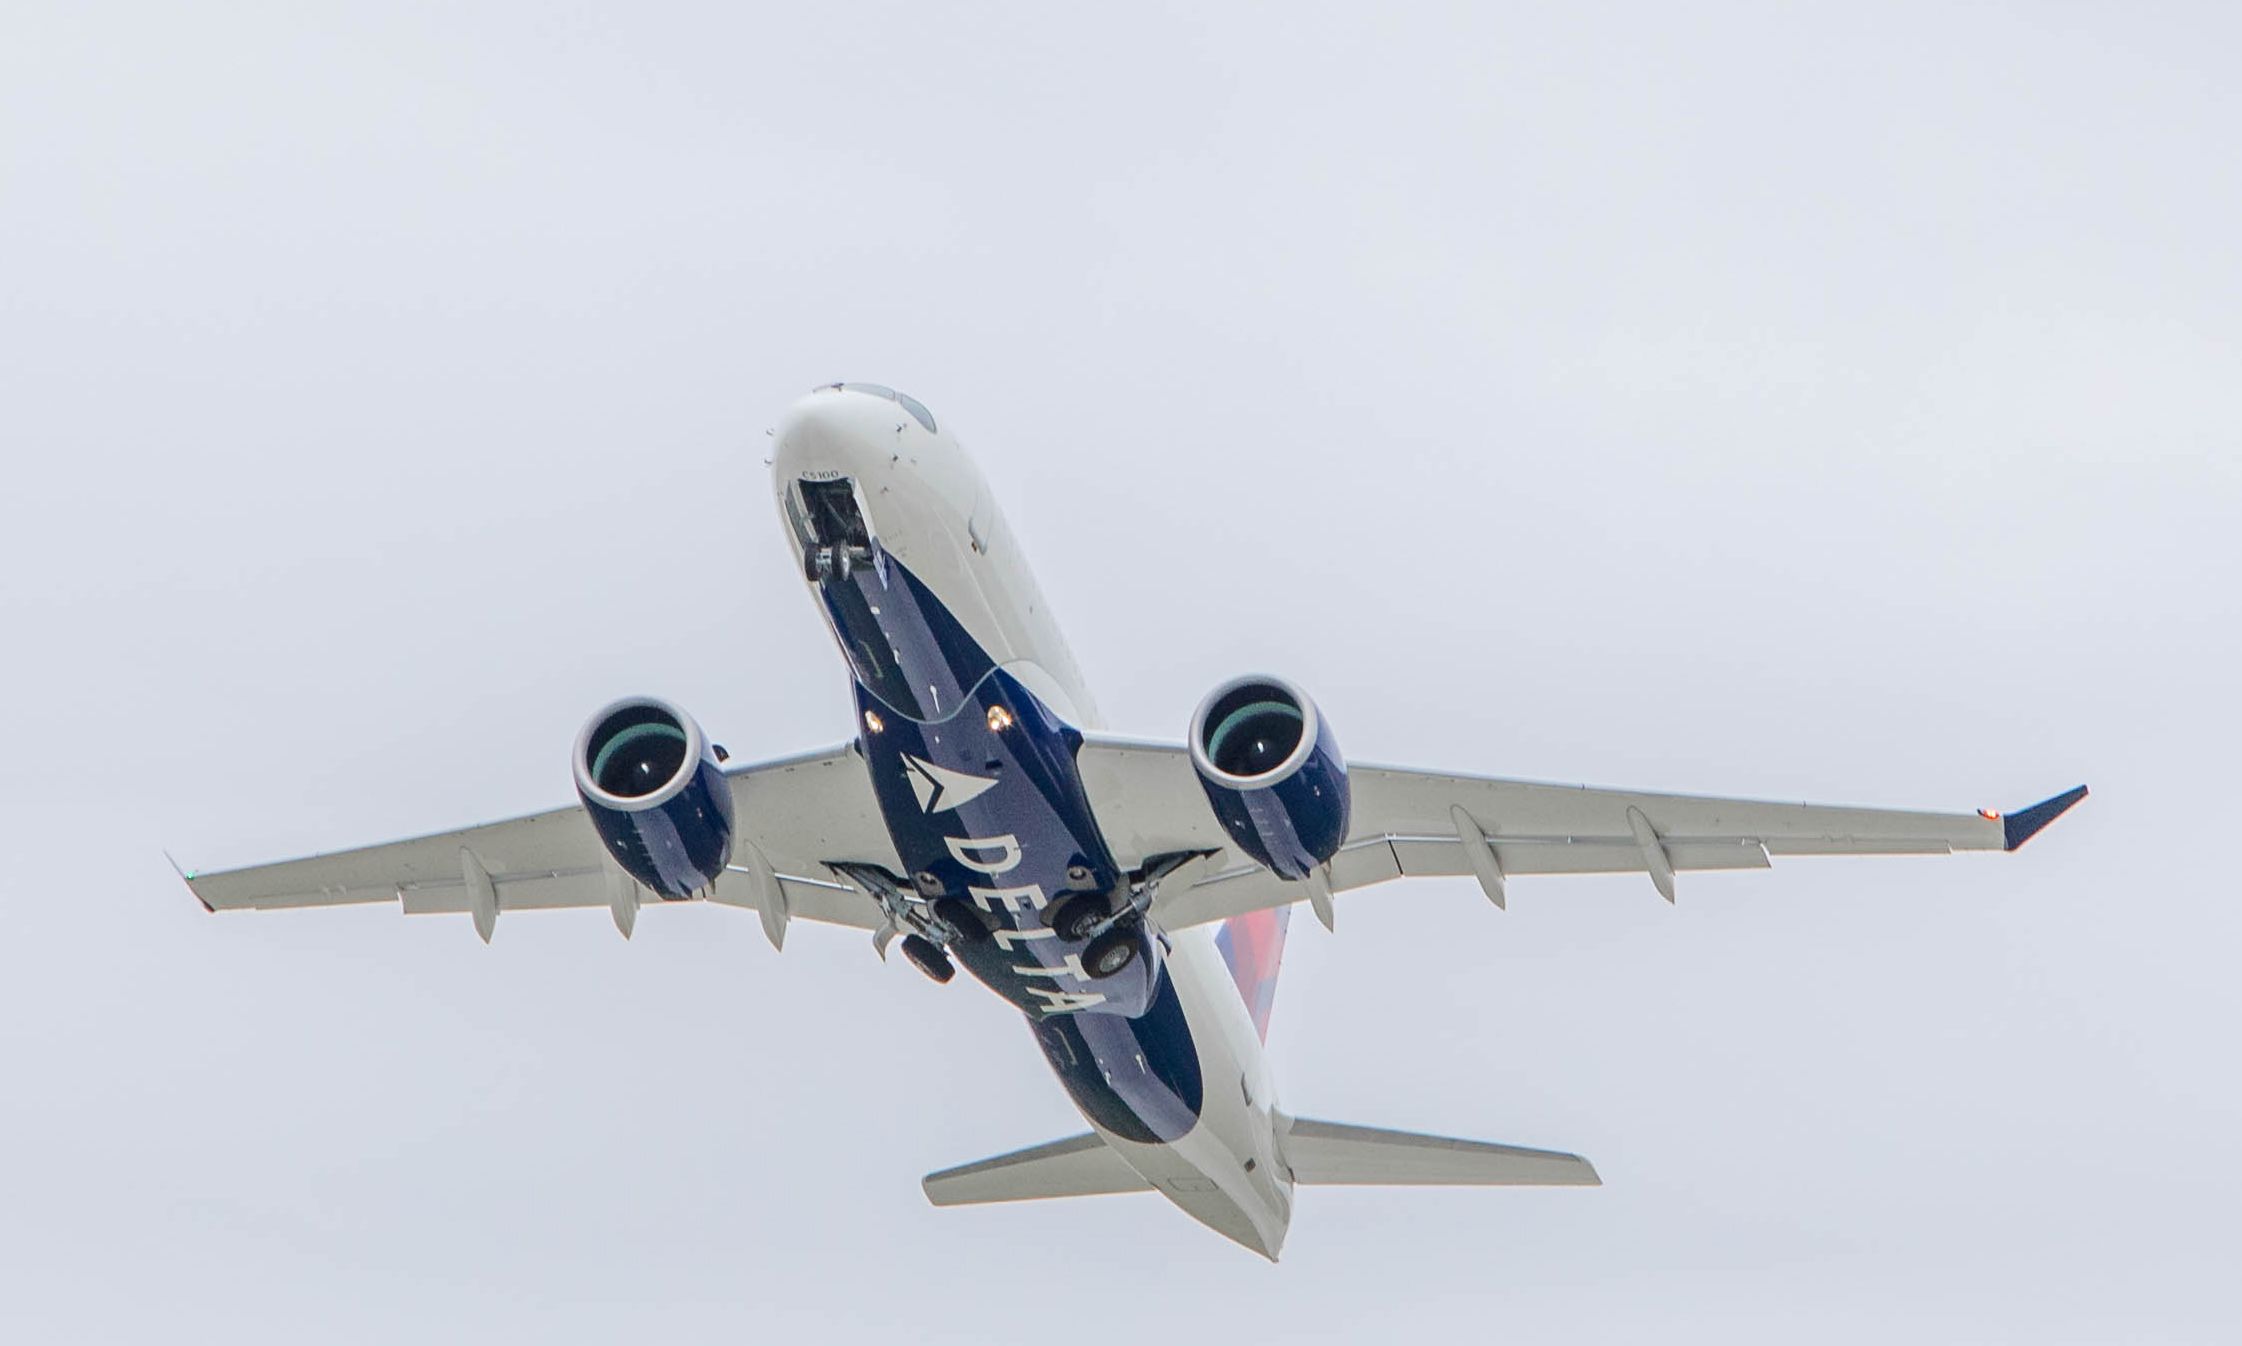 Airbus shows off A220-300 aircraft in demonstration tour